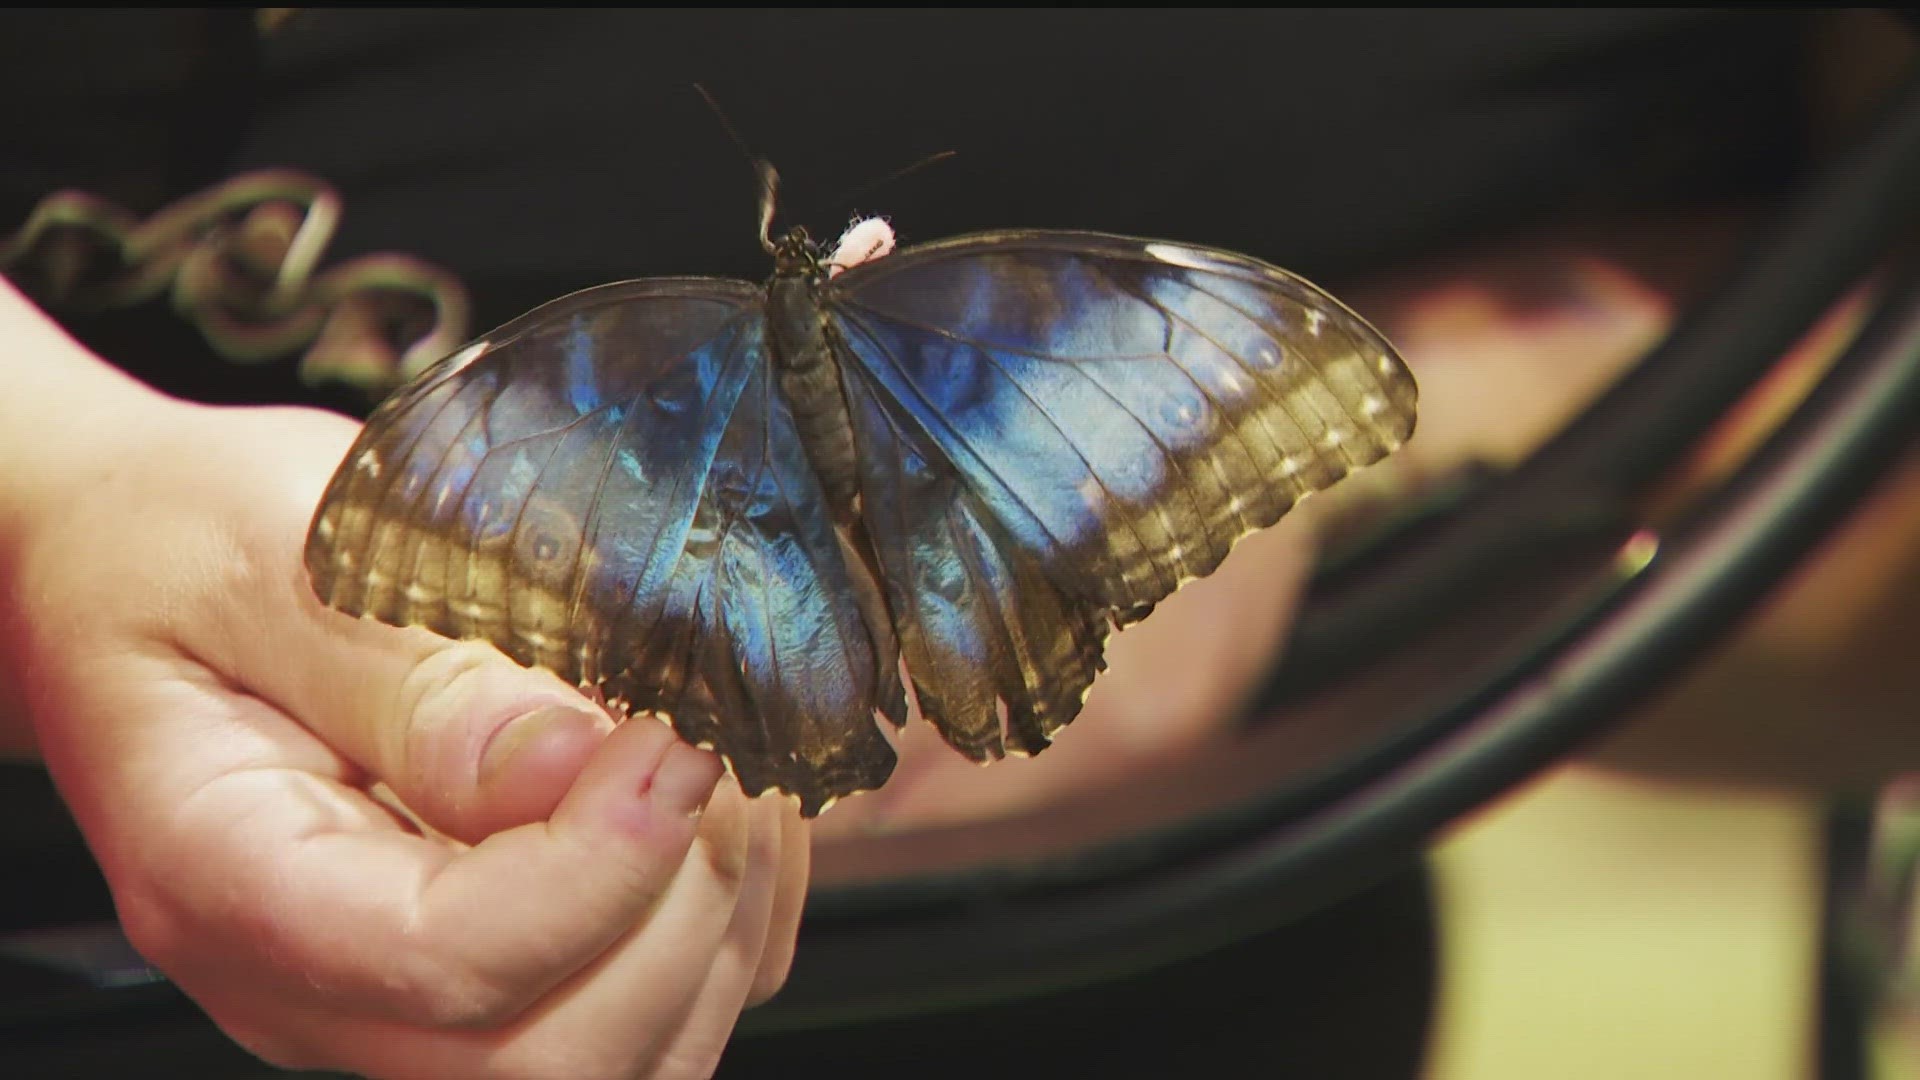 David Bohlken stocks the Butterfly House at the State Fair with thousands of butterflies. But in recent years, his job has gotten a lot harder.